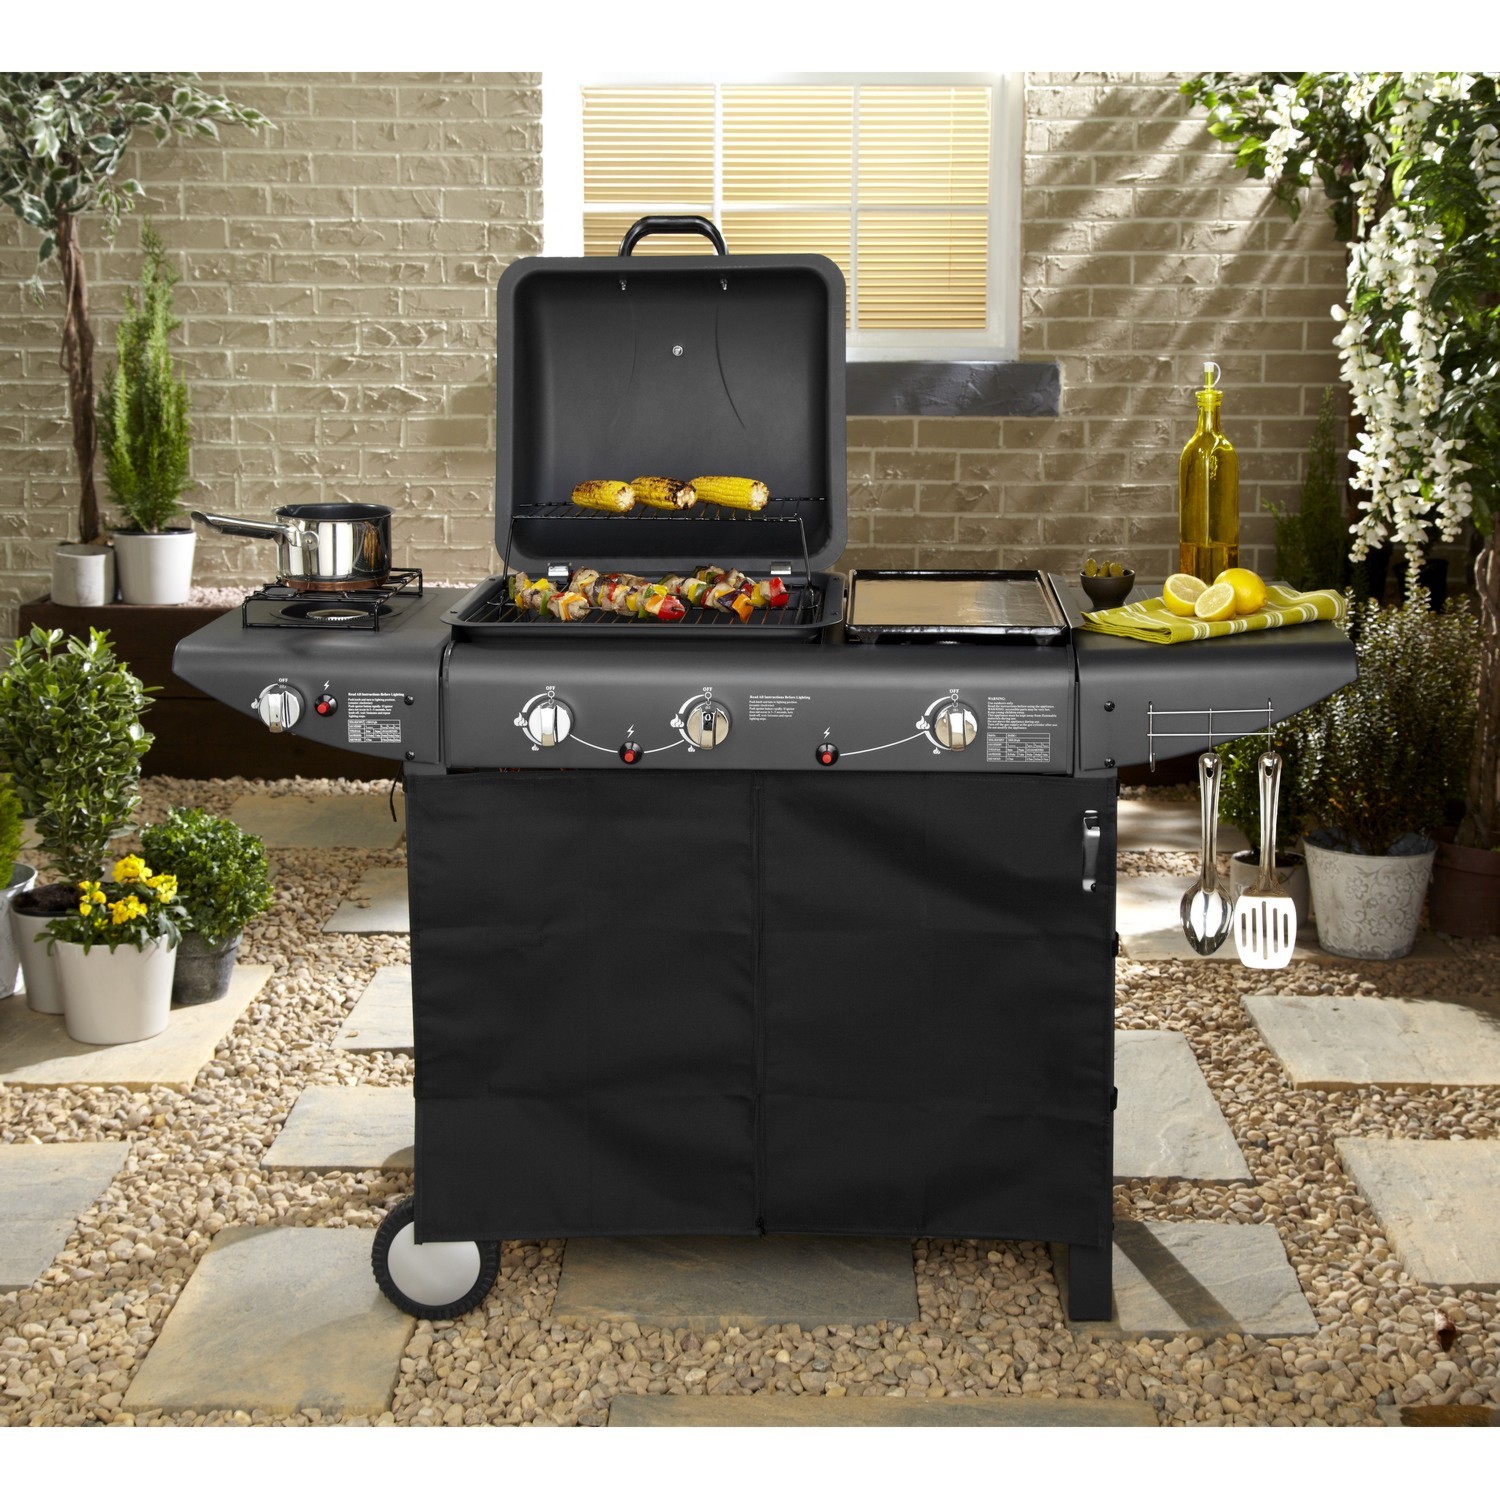 Hobart Two Burner Grill With Two Side Burners - Black Image 2